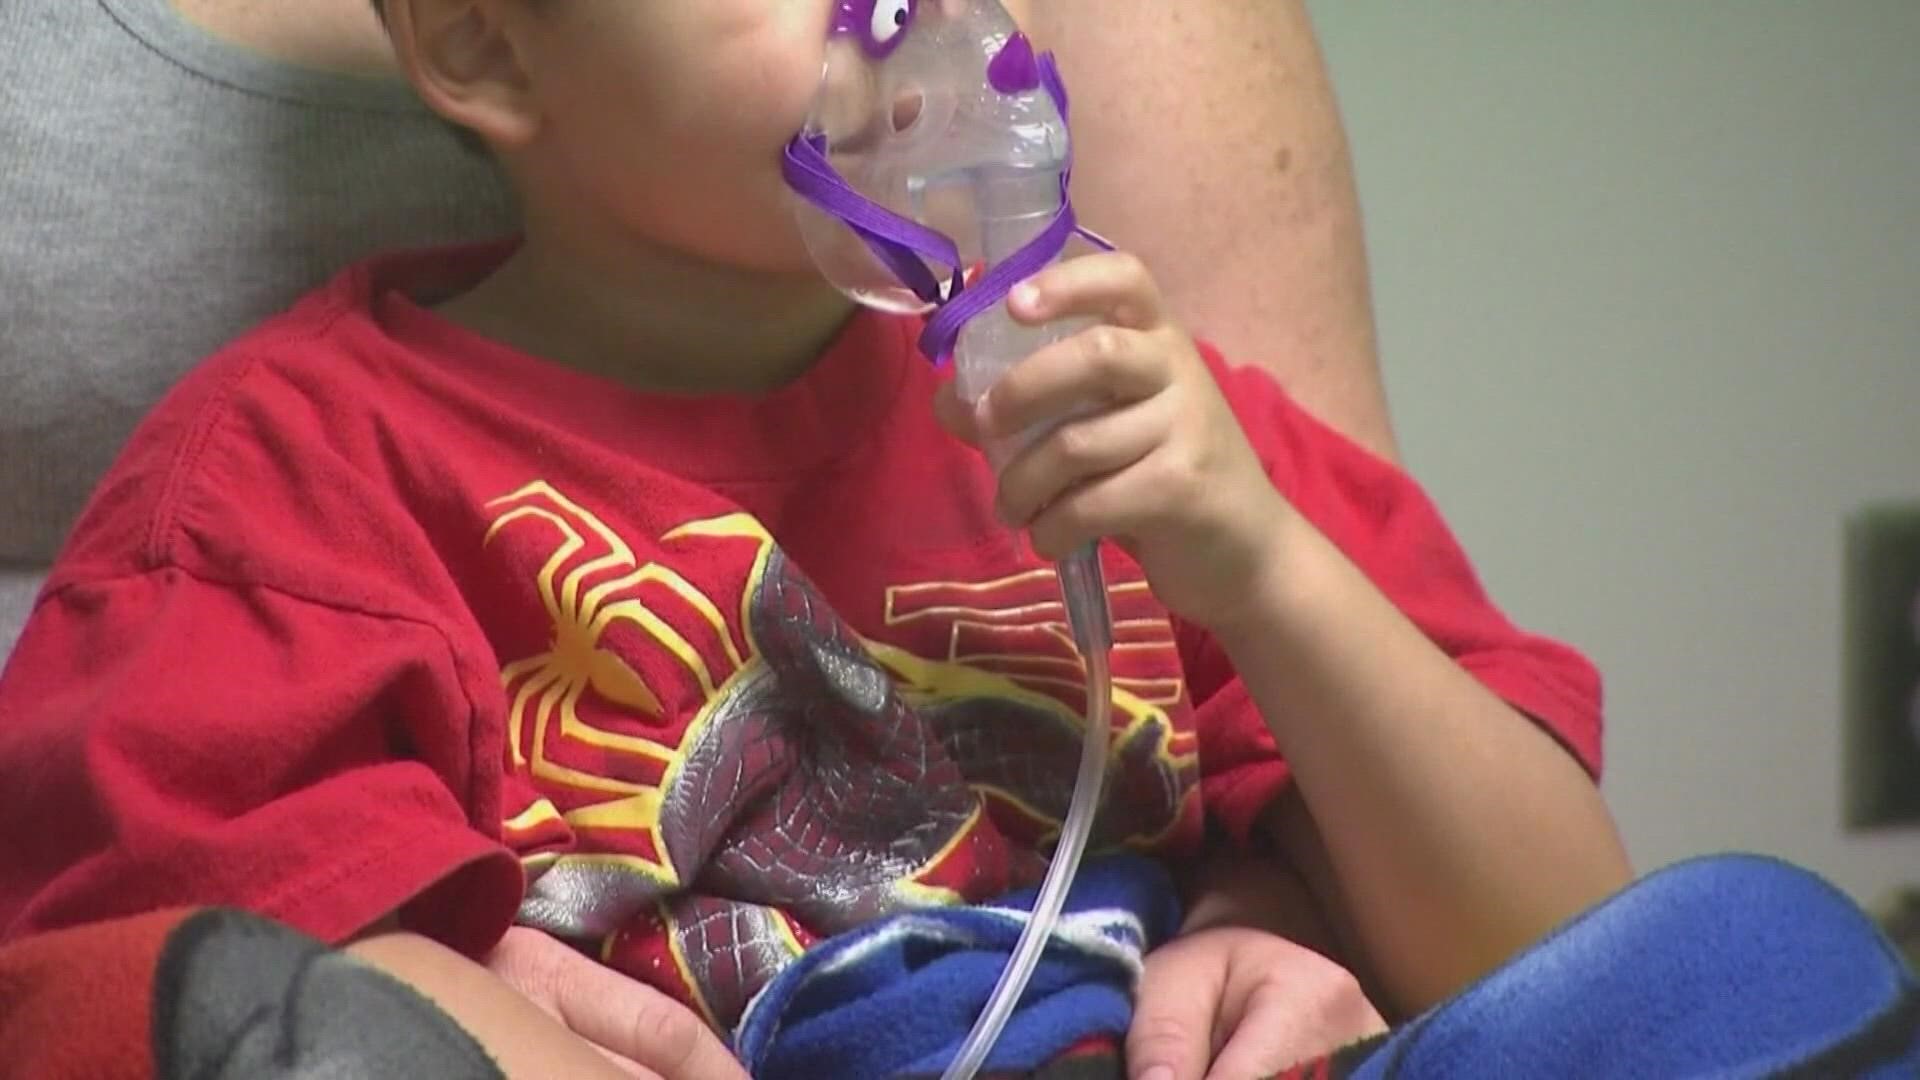 A triple threat of respiratory illnesses is causing concern from doctors across the country. Here's how you can protect your kids from RSV, COVID-19 and the flu.